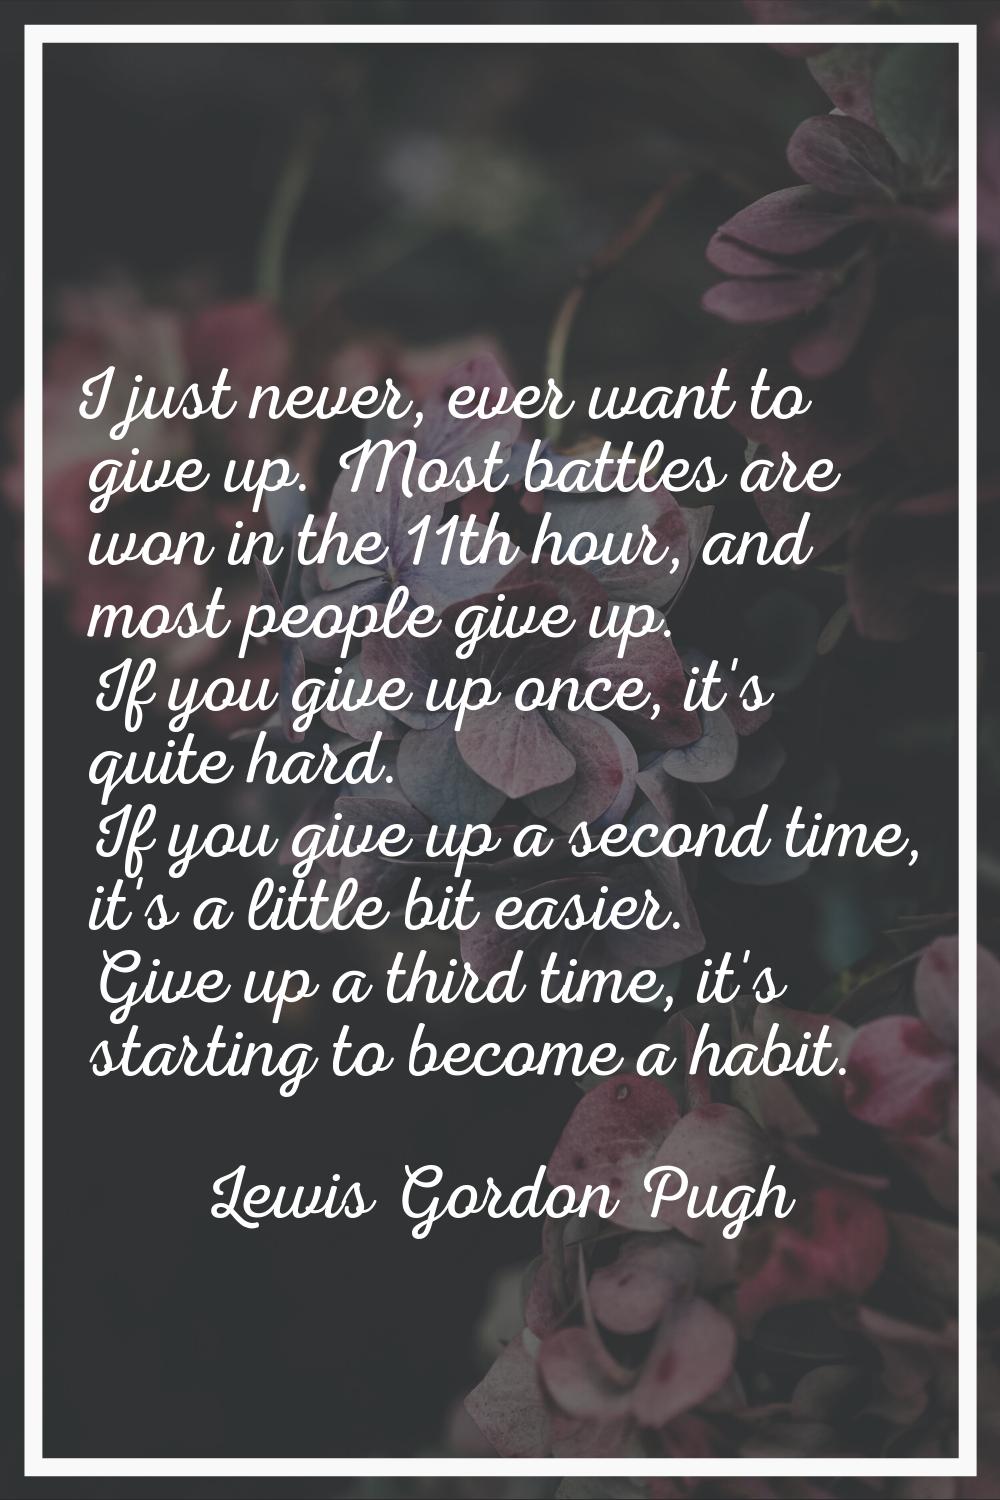 I just never, ever want to give up. Most battles are won in the 11th hour, and most people give up.